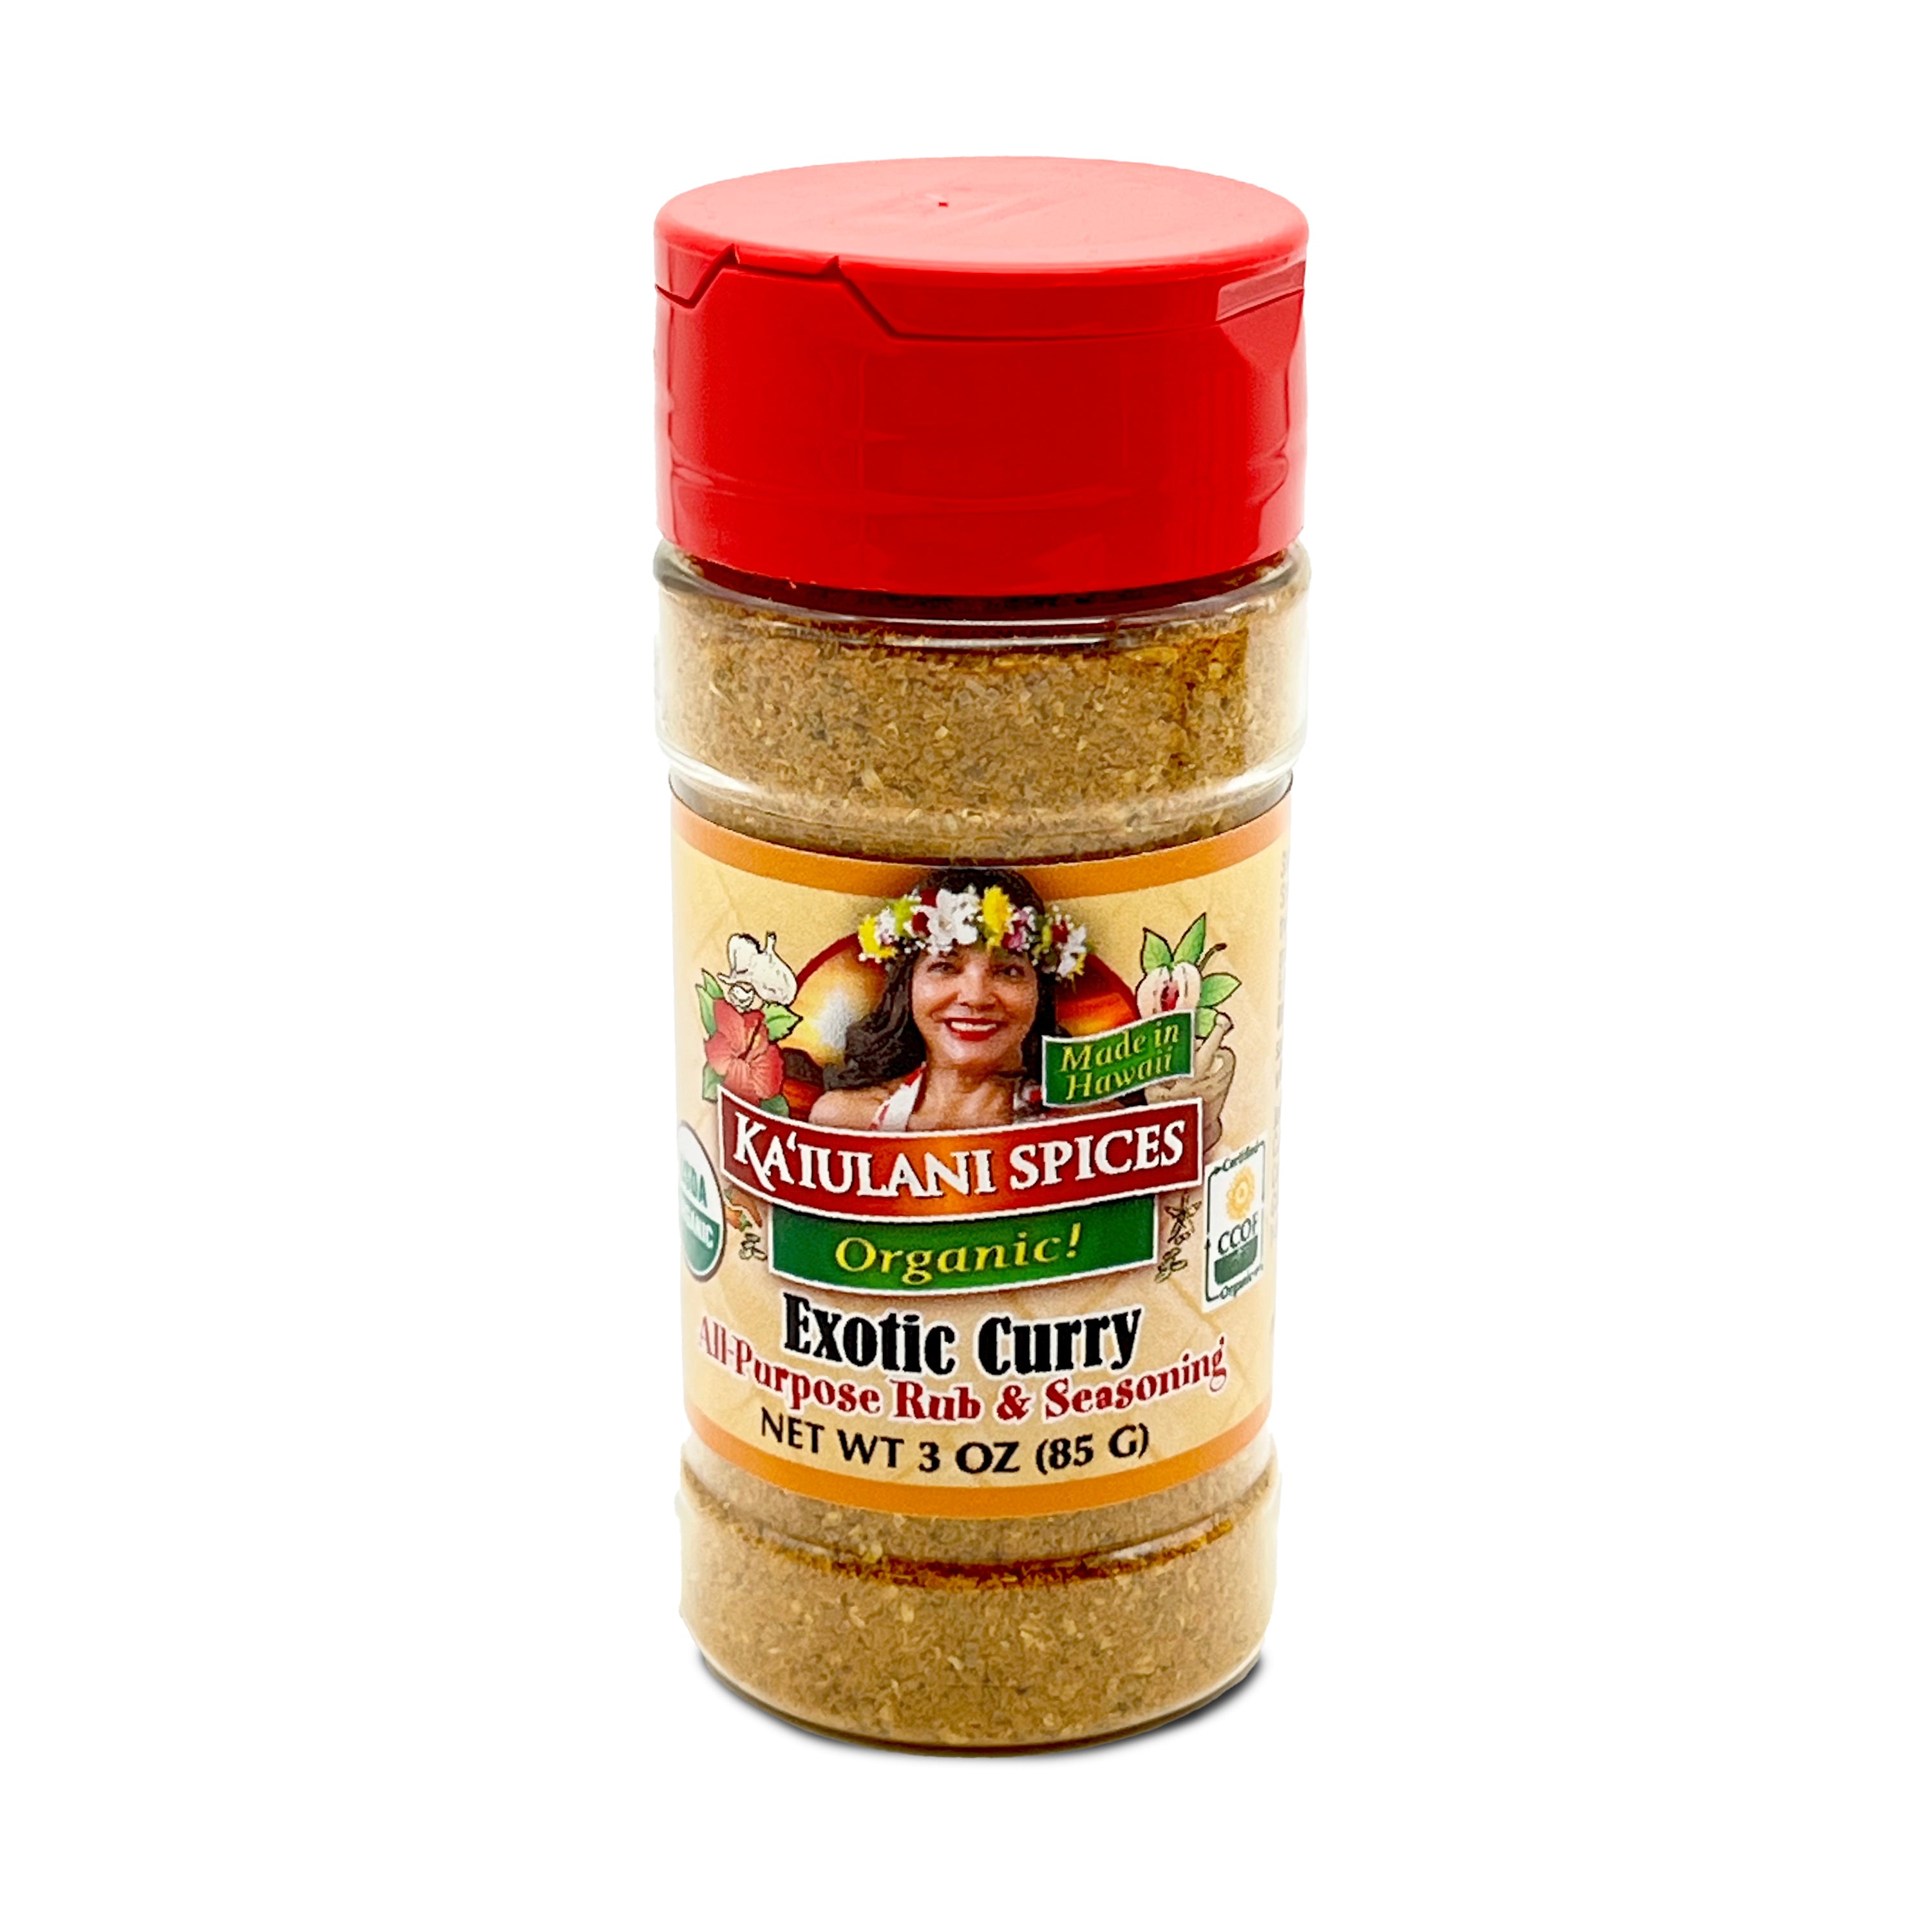 MONARCH POULTRY SEASONING - US Foods CHEF'STORE